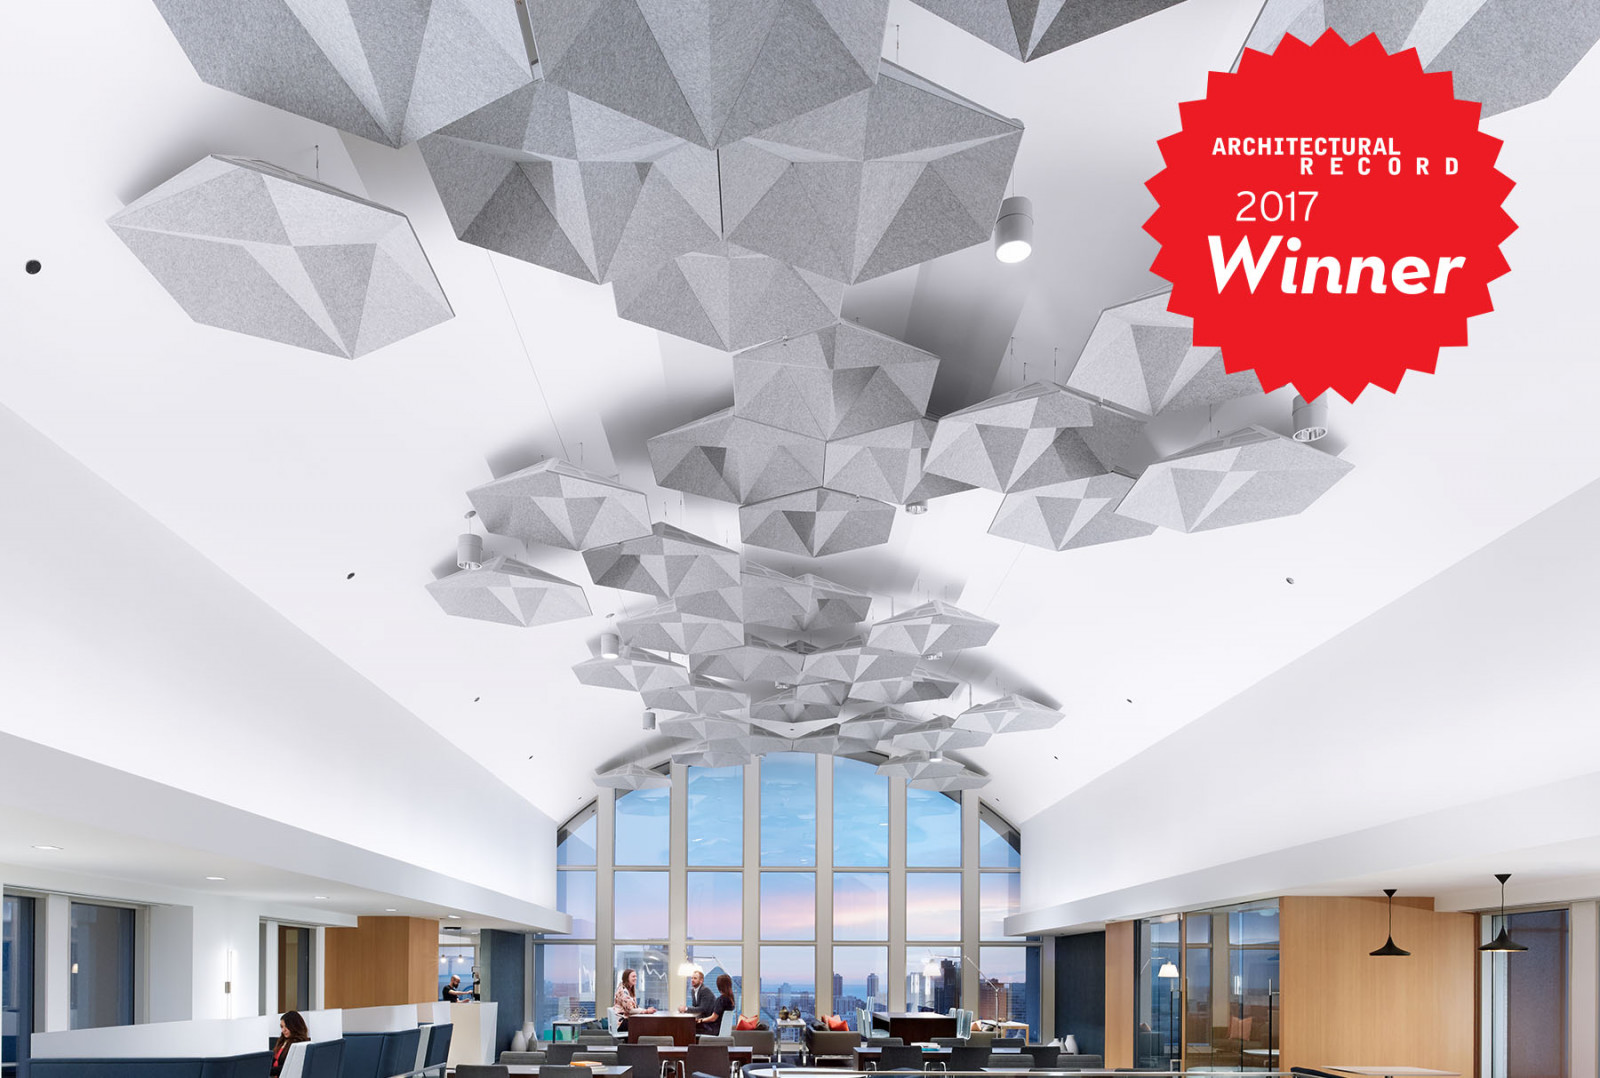 SoundStar® faceted, acoustical system is the 2017 Architectural Record winner